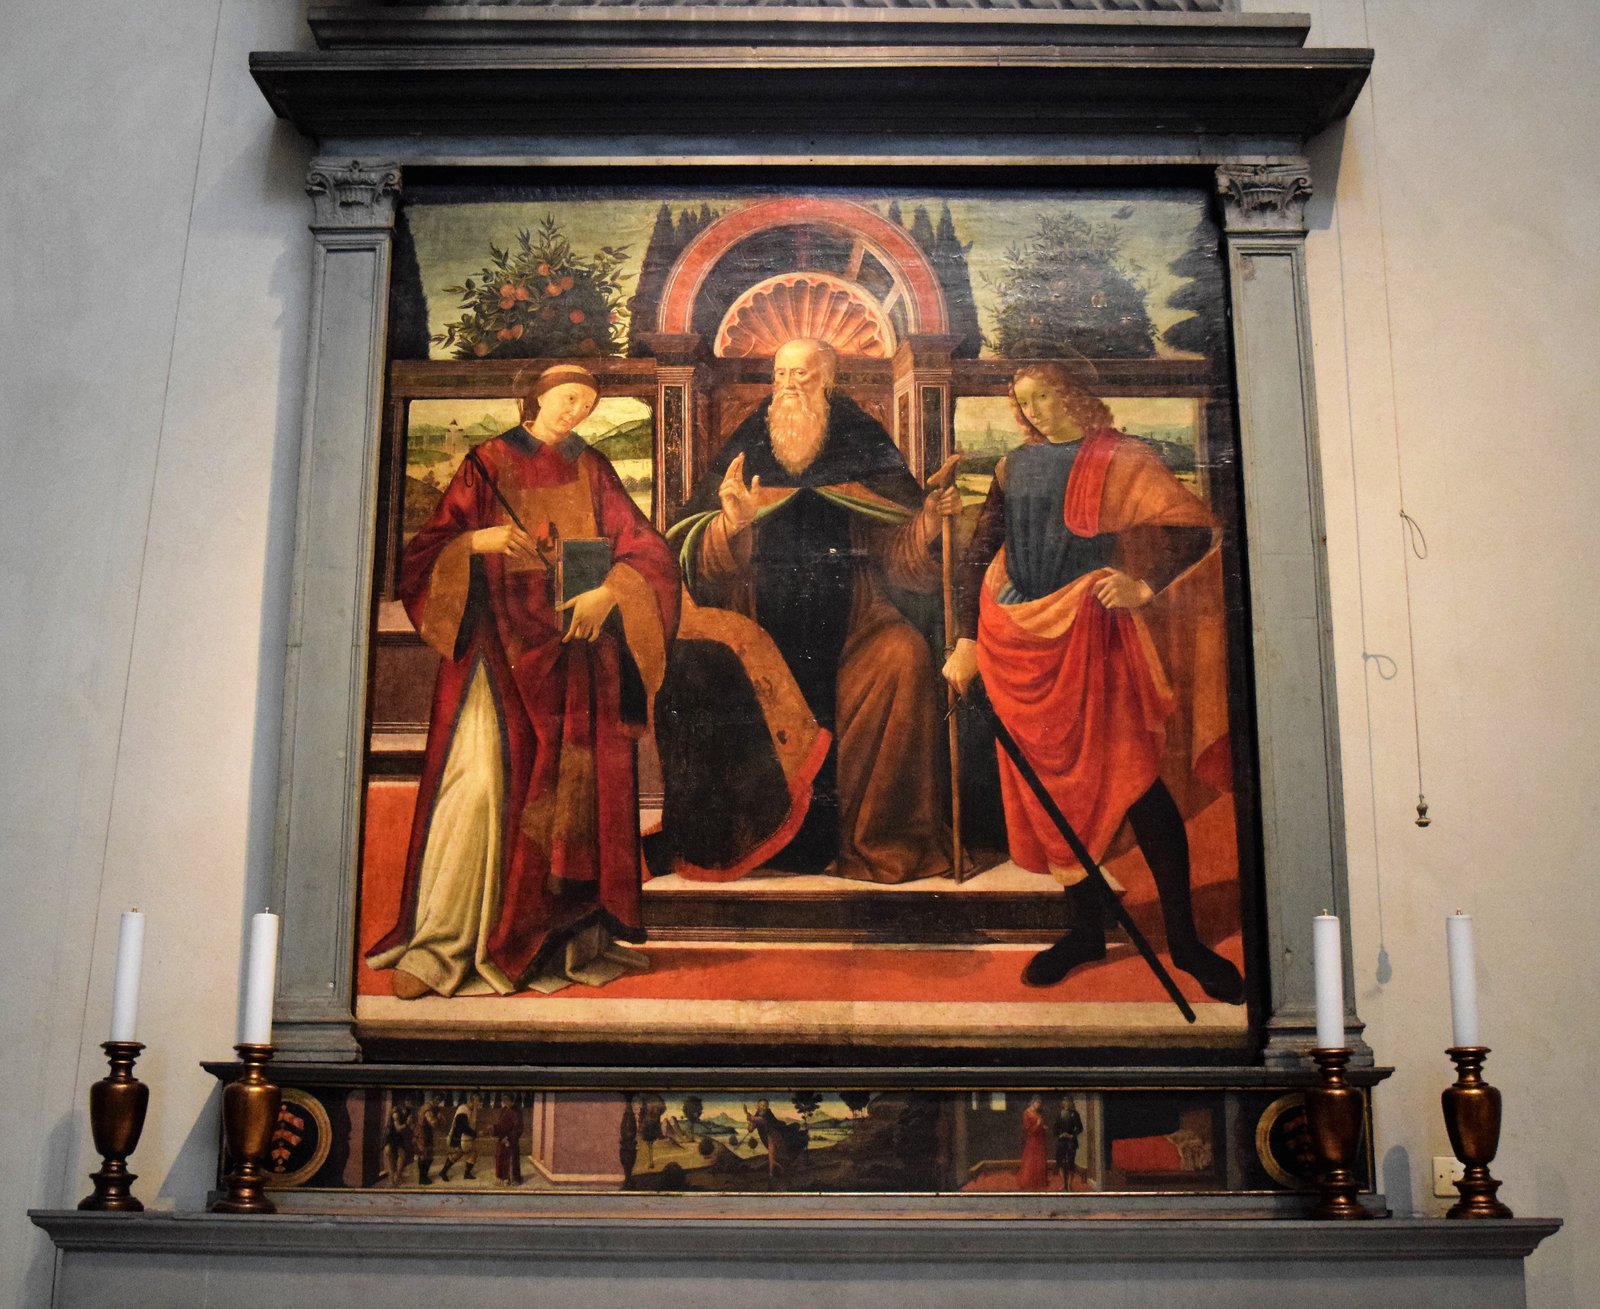 painting in San Lorenzo church in Florence, Italy